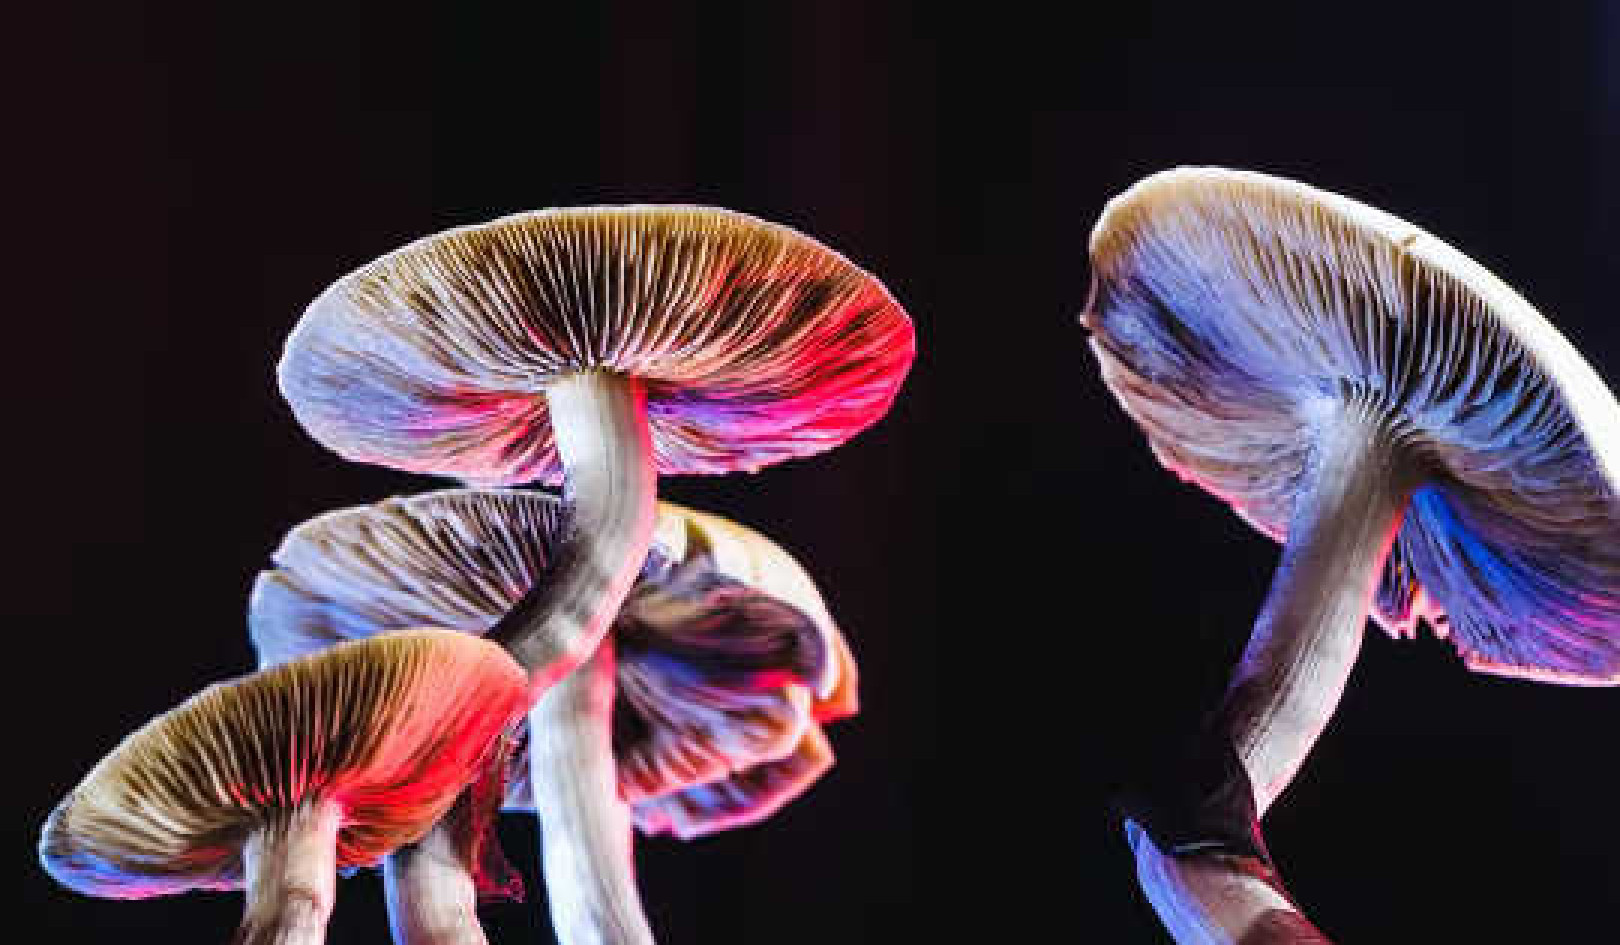 Do Mushrooms Really Use Language To Talk To Each Other?